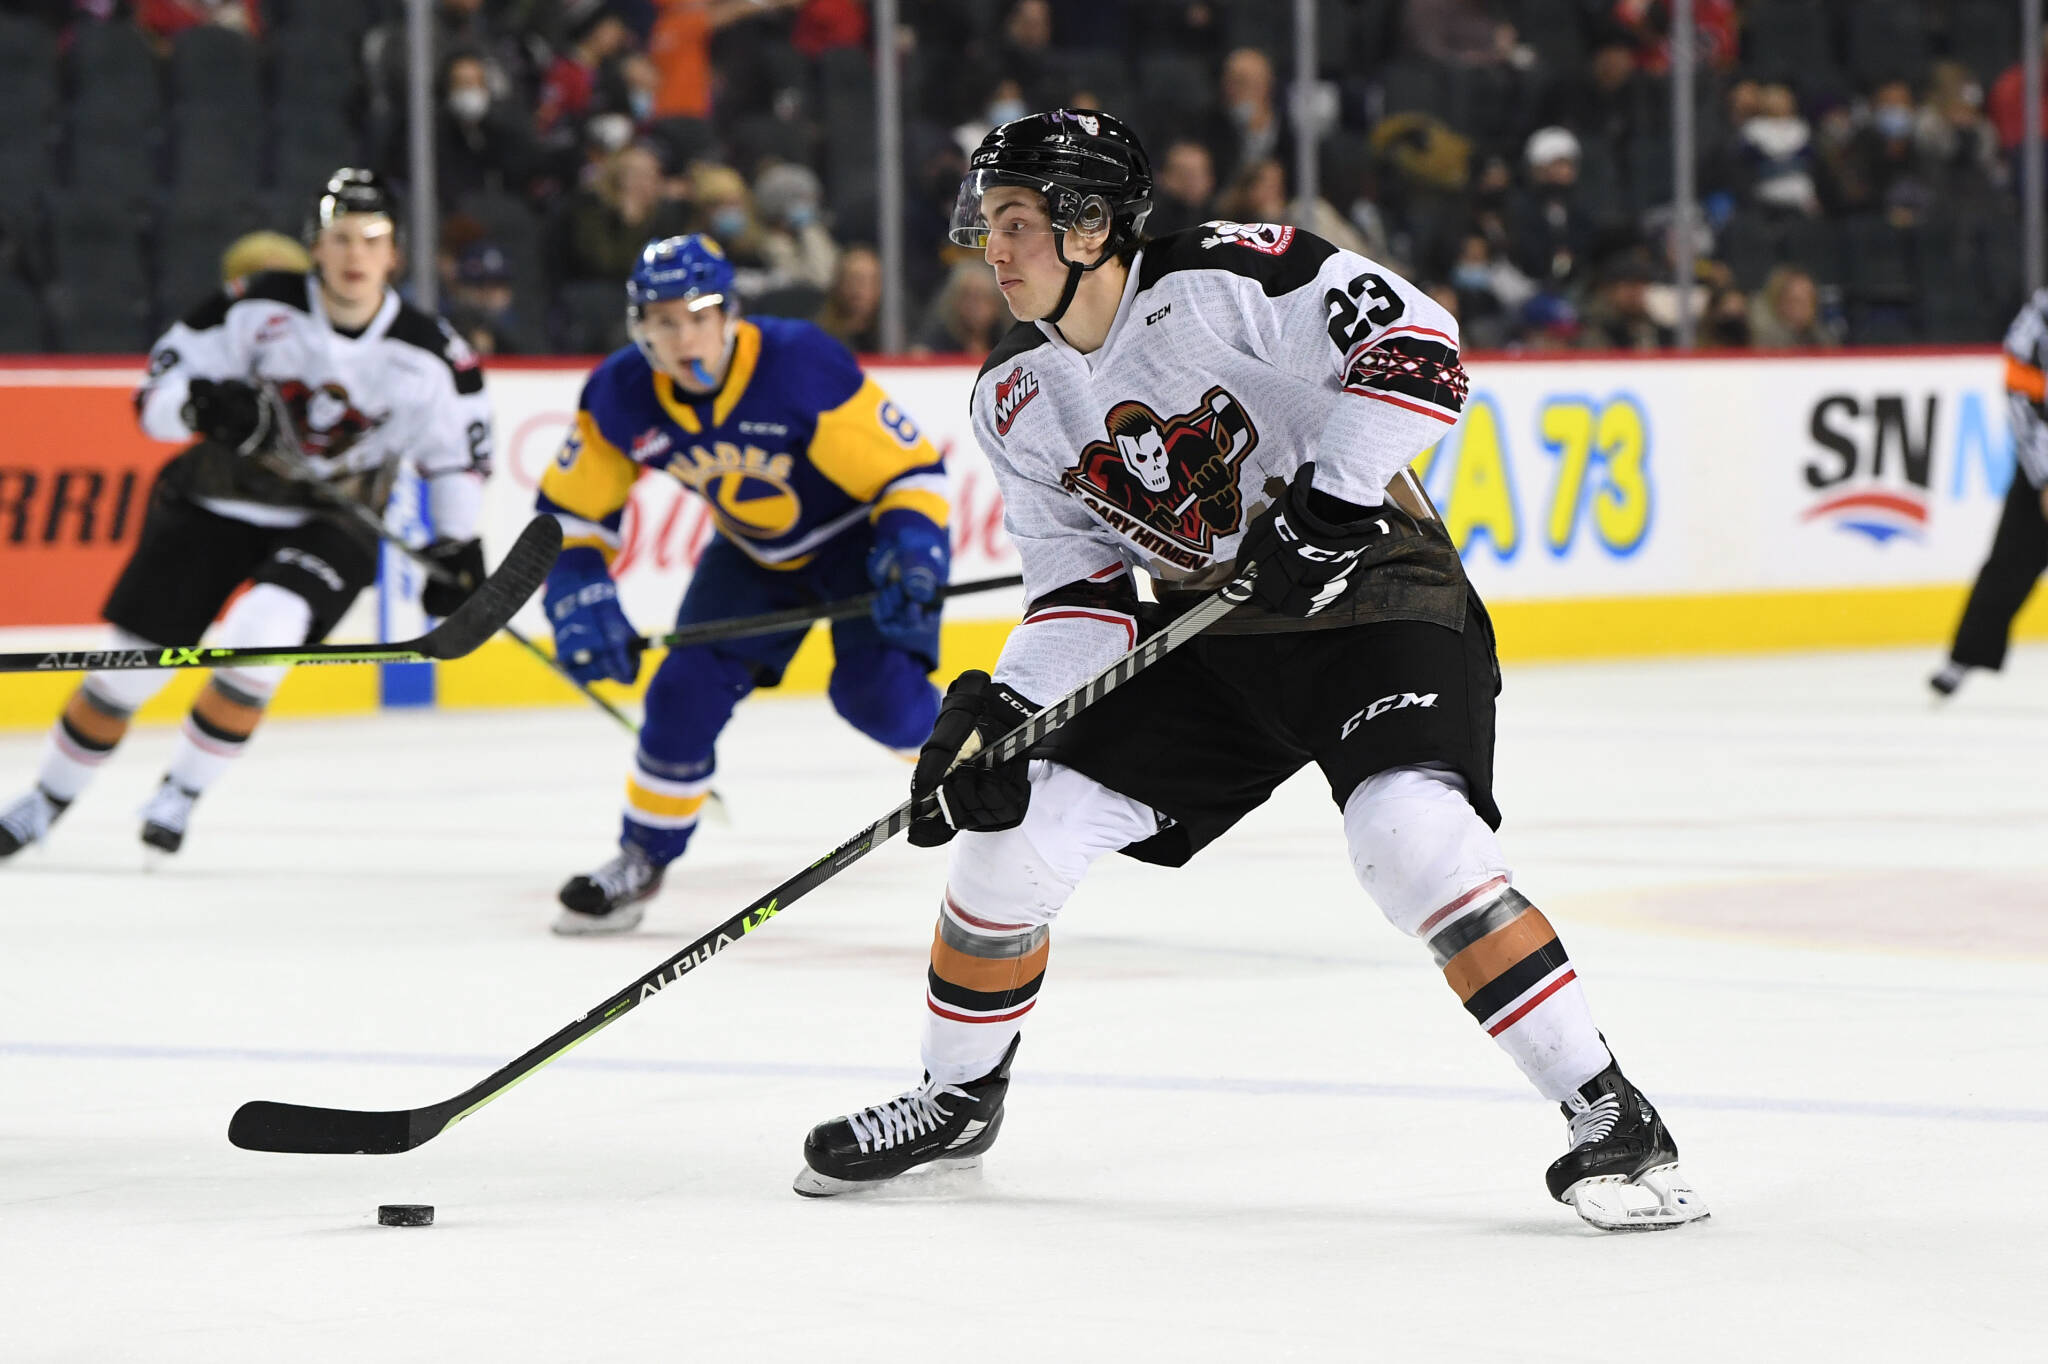 Calgary’s Steel Quiring looks for a shot during a game against Saskatoon on Feb. 20, 2022, at the Scotiabank Saddledome in Calgary, Alberta, Canada. (Candice Ward / Calgary Hitmen)